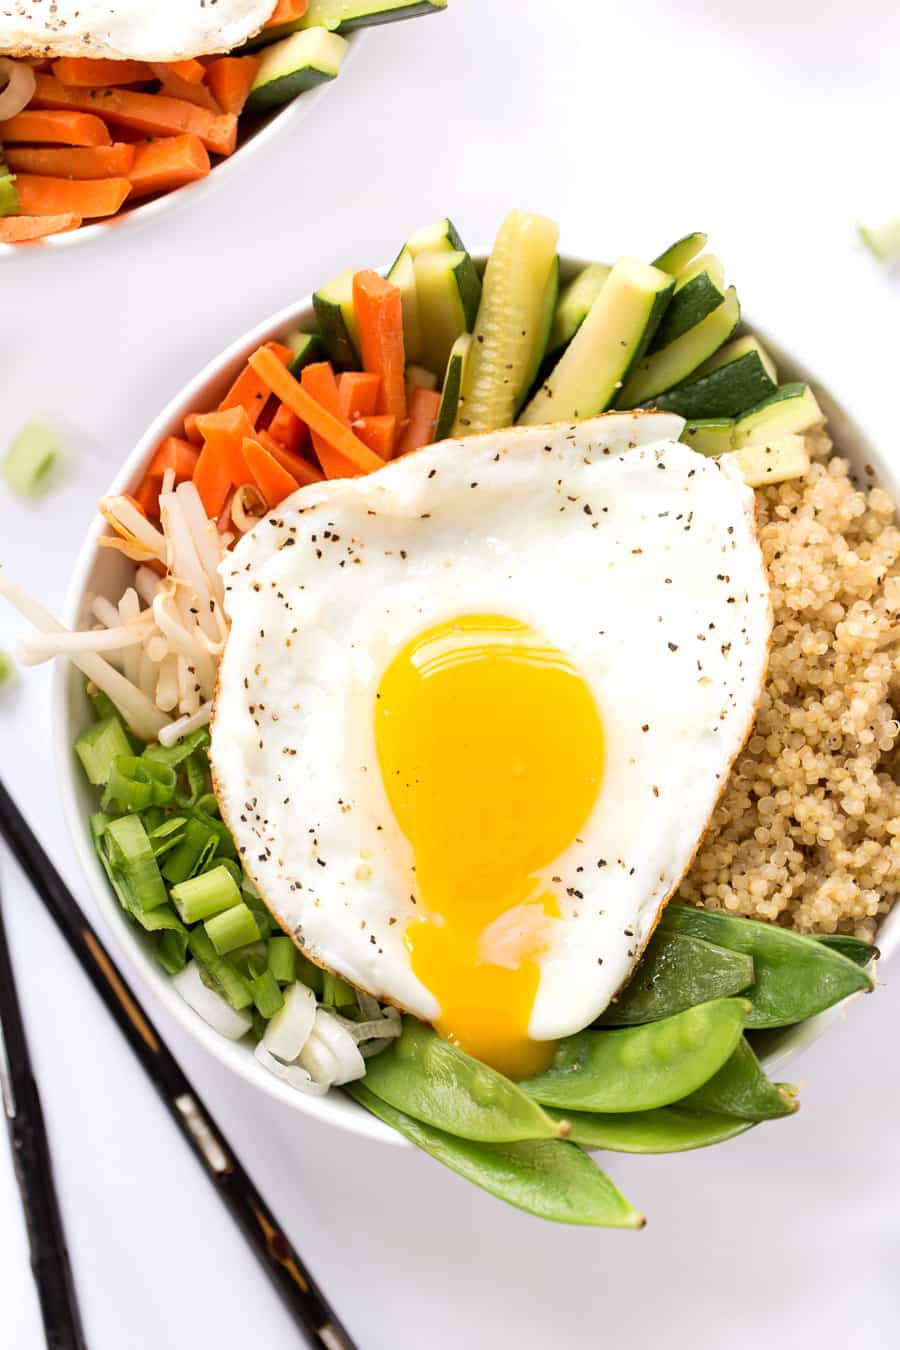 A healthy spin on this Korean staple, this QUINOA BIBIMBAP, made with fluffy quinoa, steamed vegetables and a fried egg, is a great alternative to takeout!